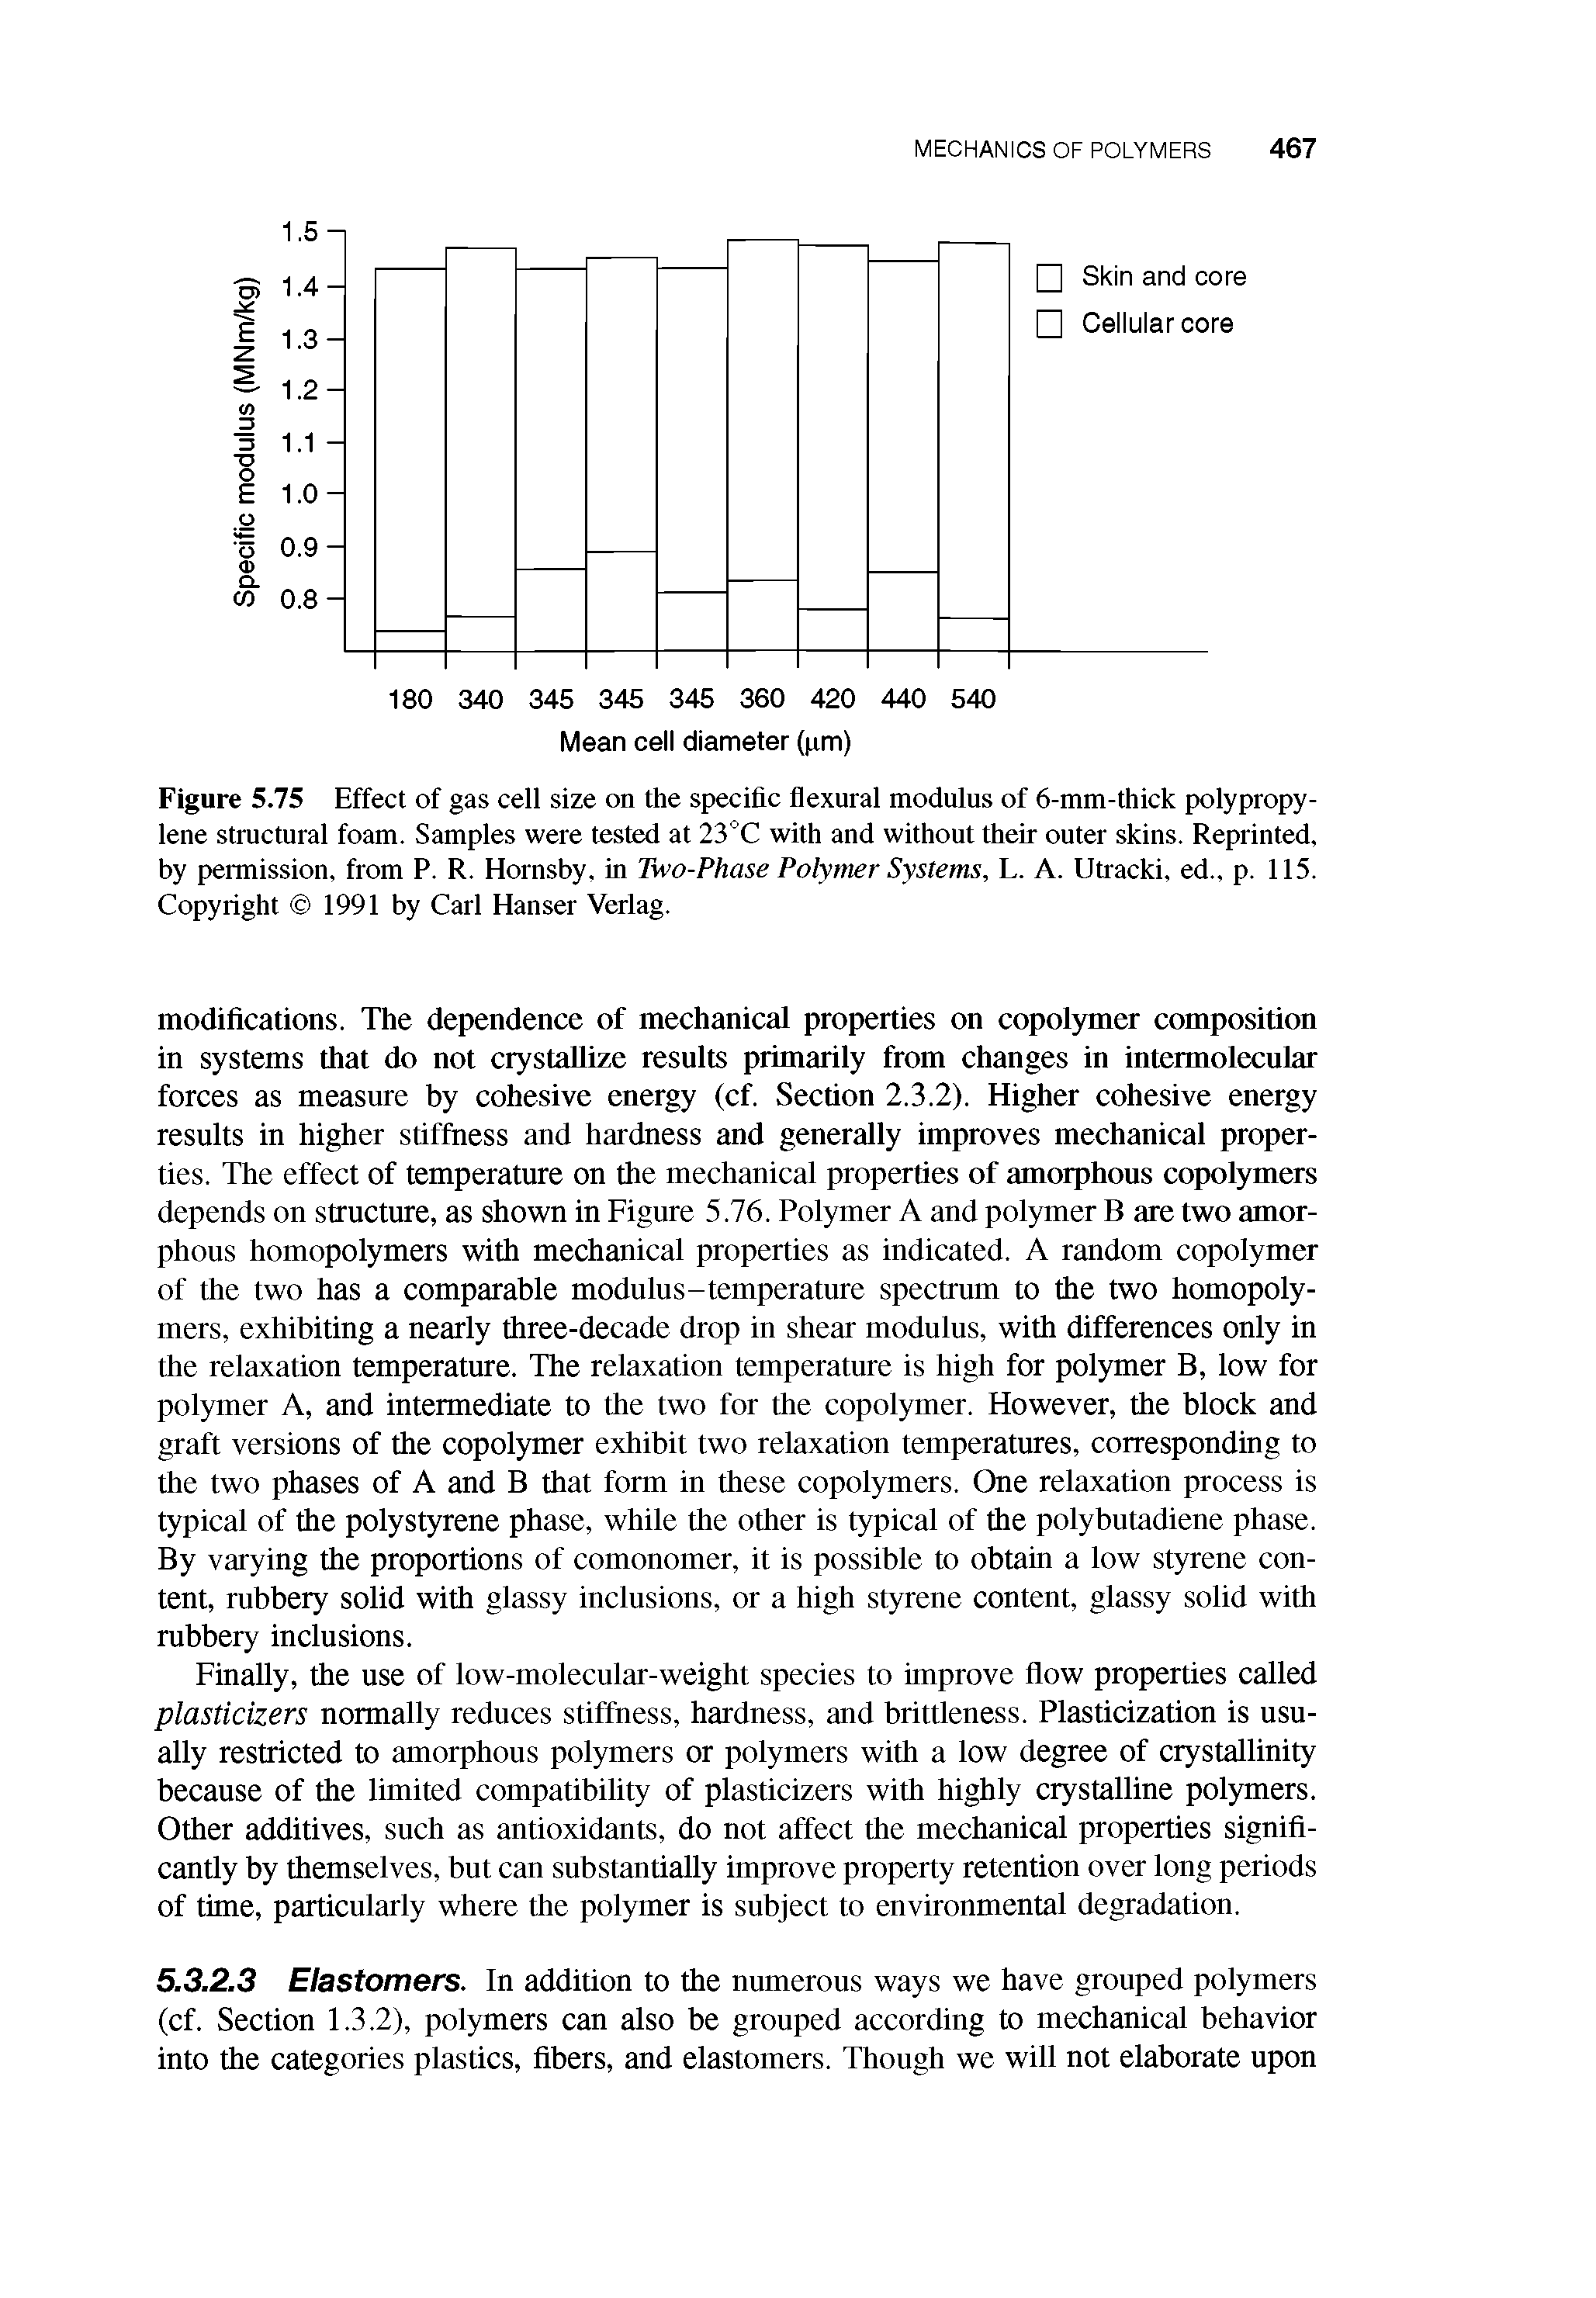 Figure 5.75 Effect of gas cell size on the specific flexural modulus of 6-mm-thick polypropylene structural foam. Samples were tested at 23°C with and without their outer skins. Reprinted, by permission, from P. R. Hornsby, in Two-Phase Polymer Systems, L. A. Utracki, ed., p. 115. Copyright 1991 by Carl Hanser Verlag.